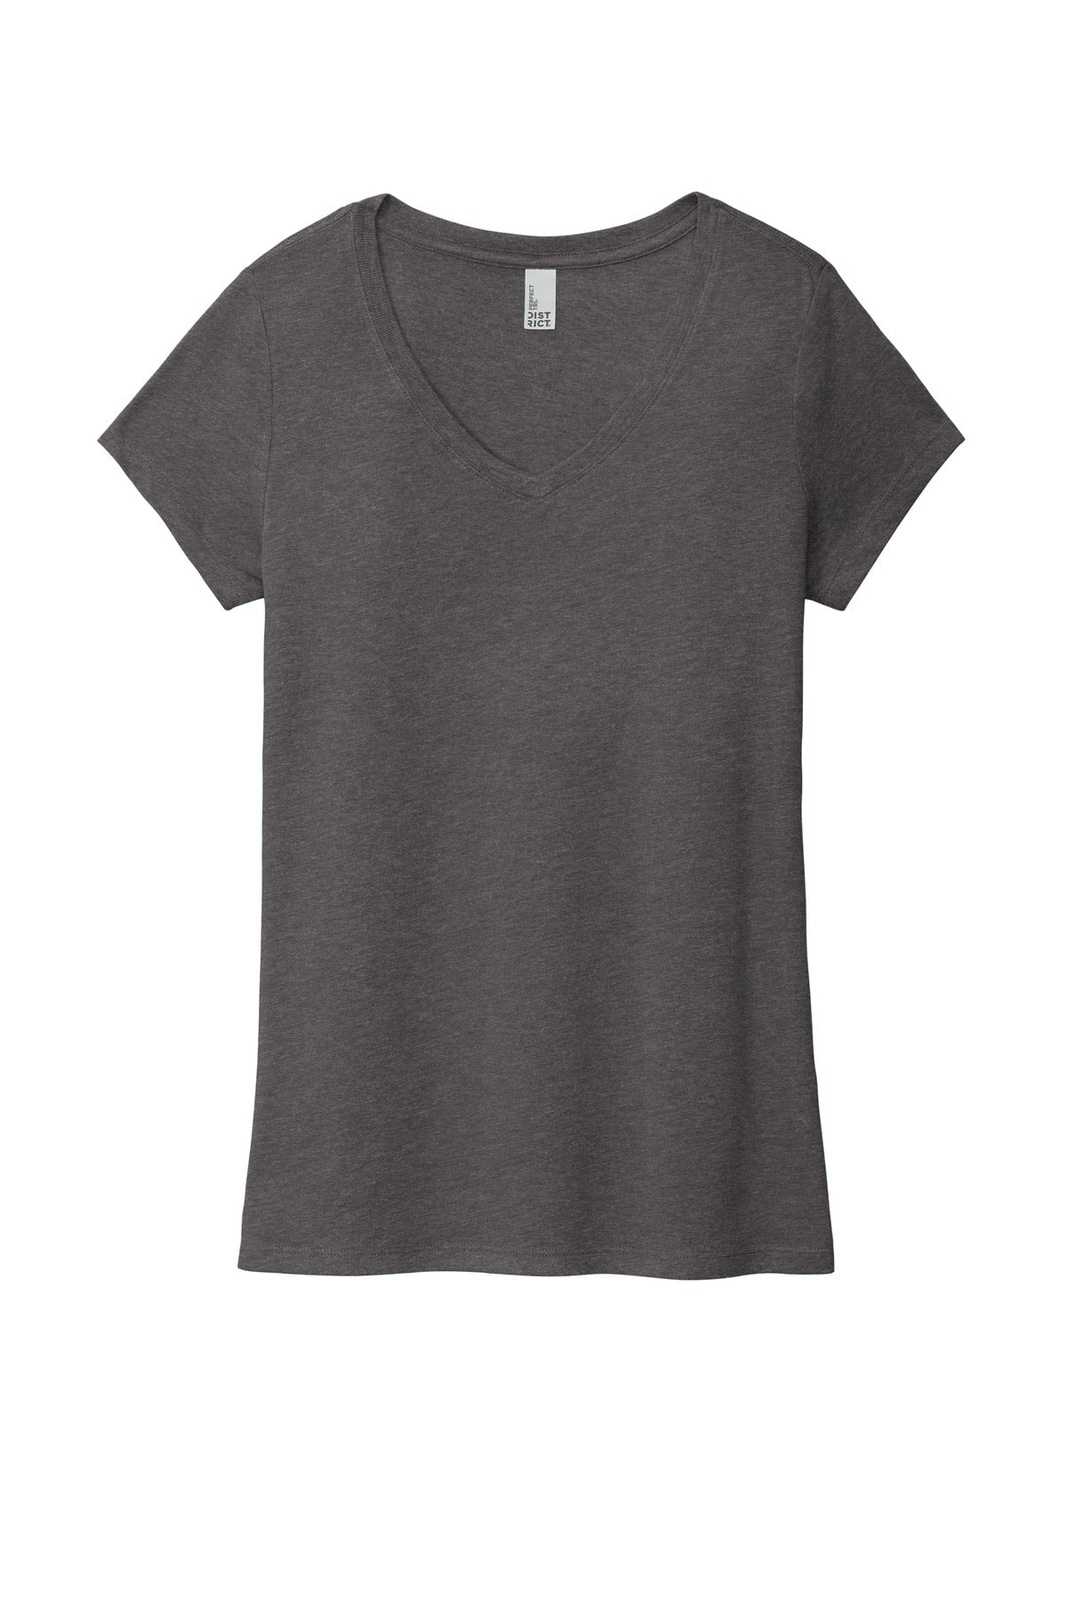 District DM1350L Women's Perfect Tri V-Neck Tee - Heathered Charcoal - HIT a Double - 1